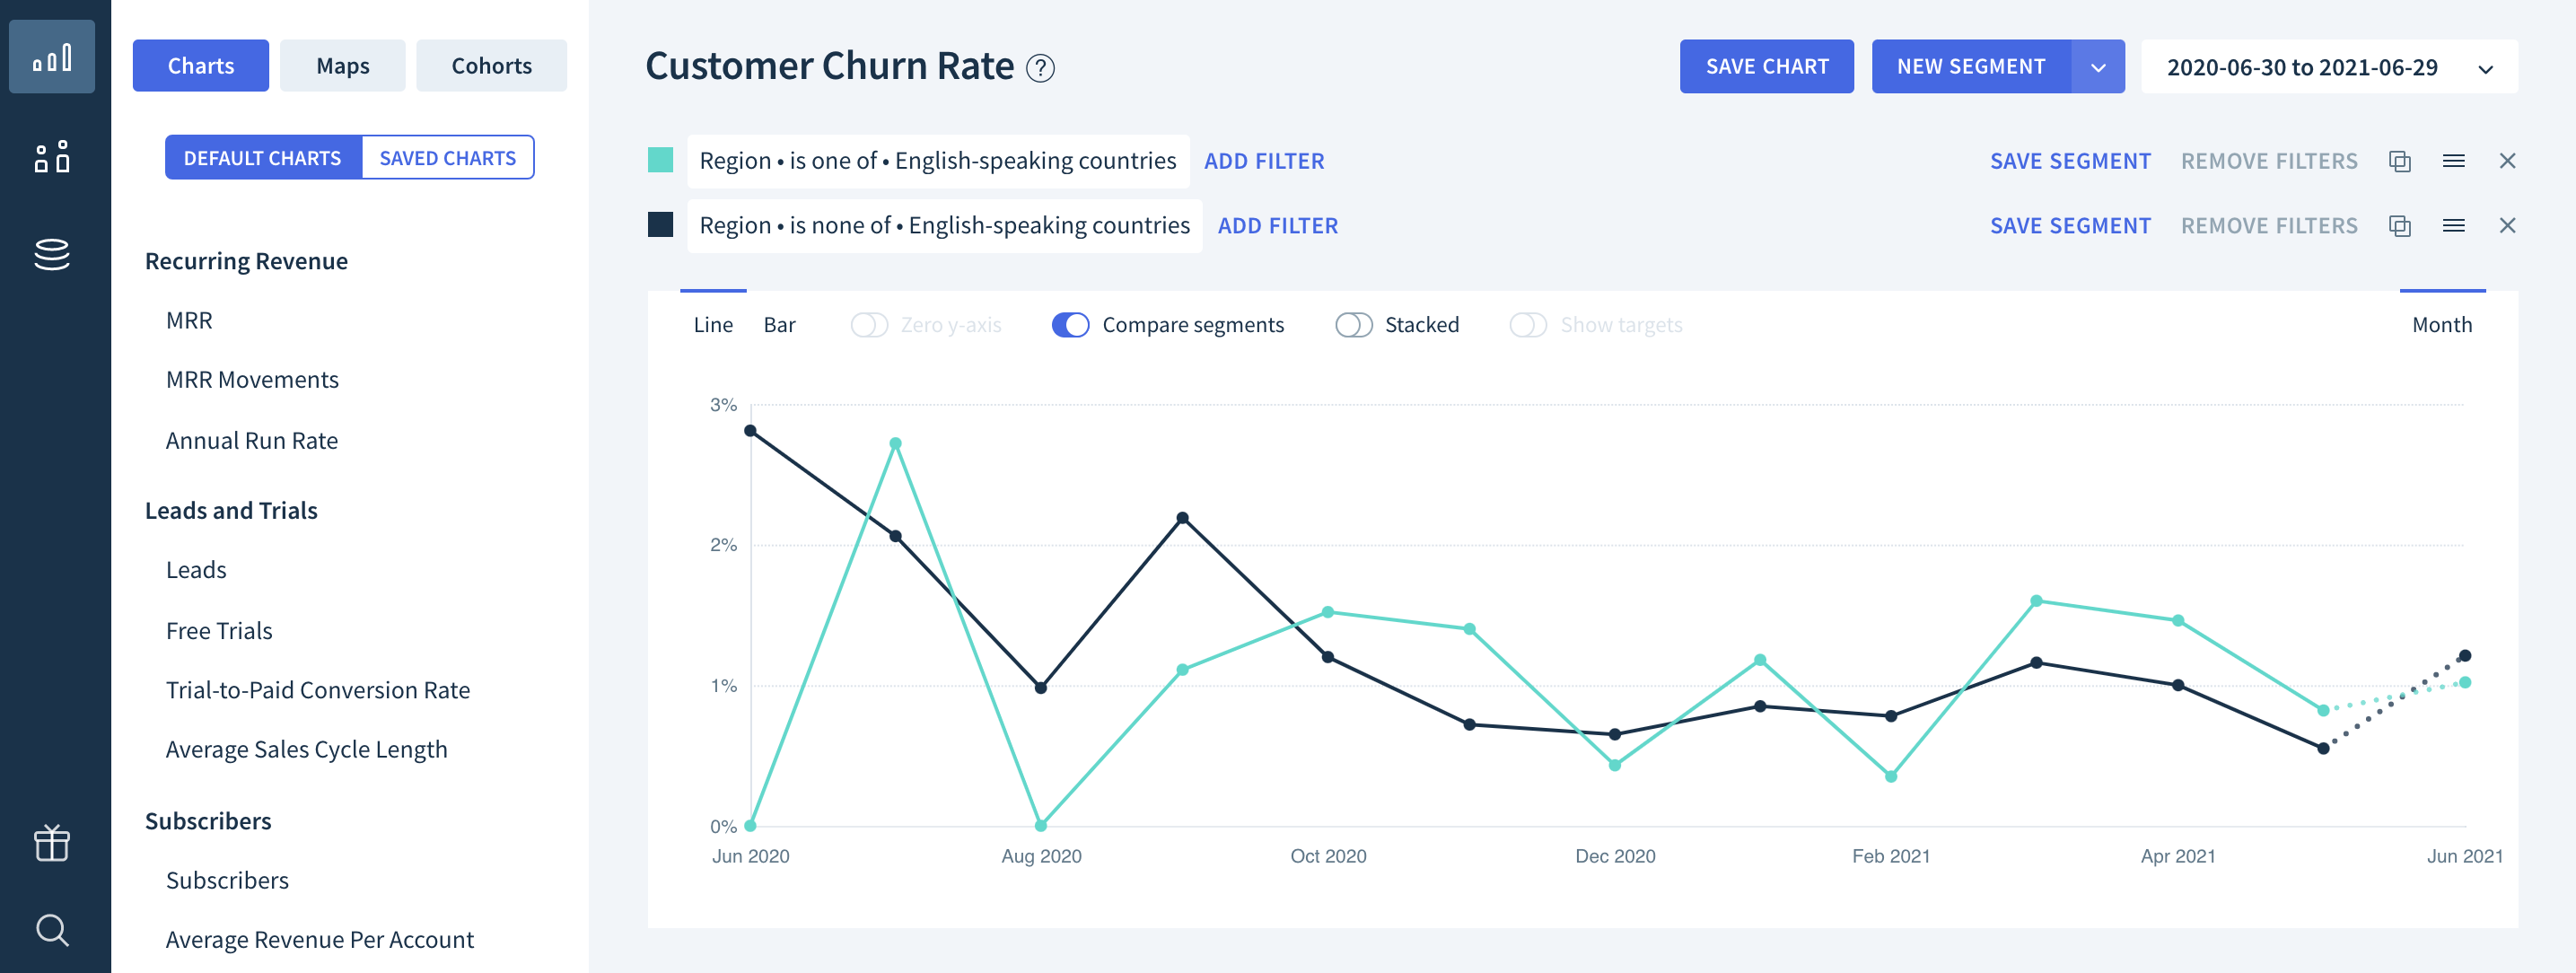 churn_rate_compare_regions.png